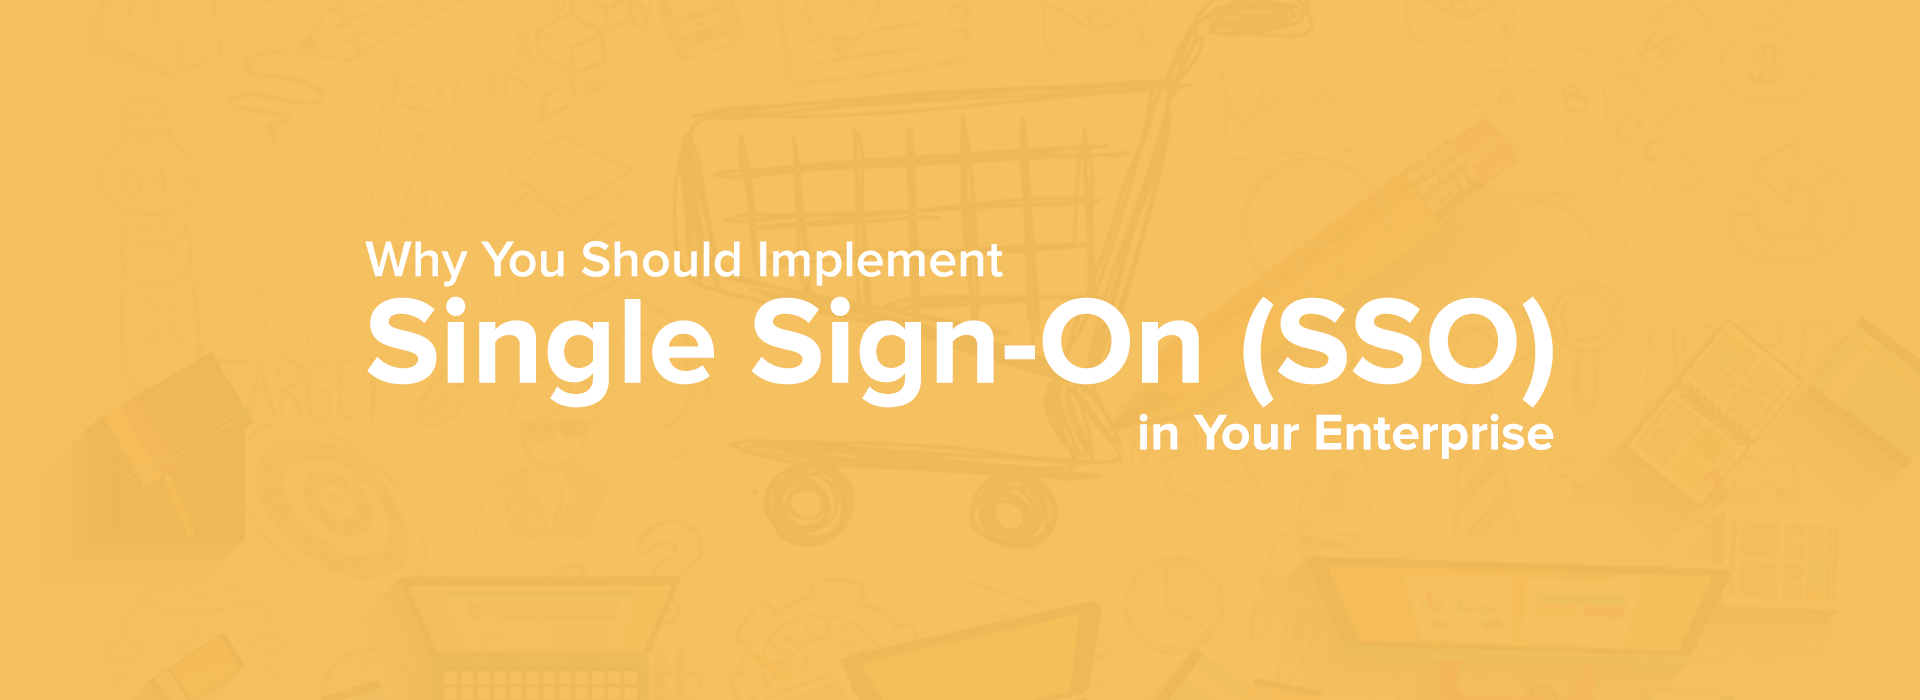 5 Reasons Why You Should Implement Single Sign-On Process in Your Enterprise